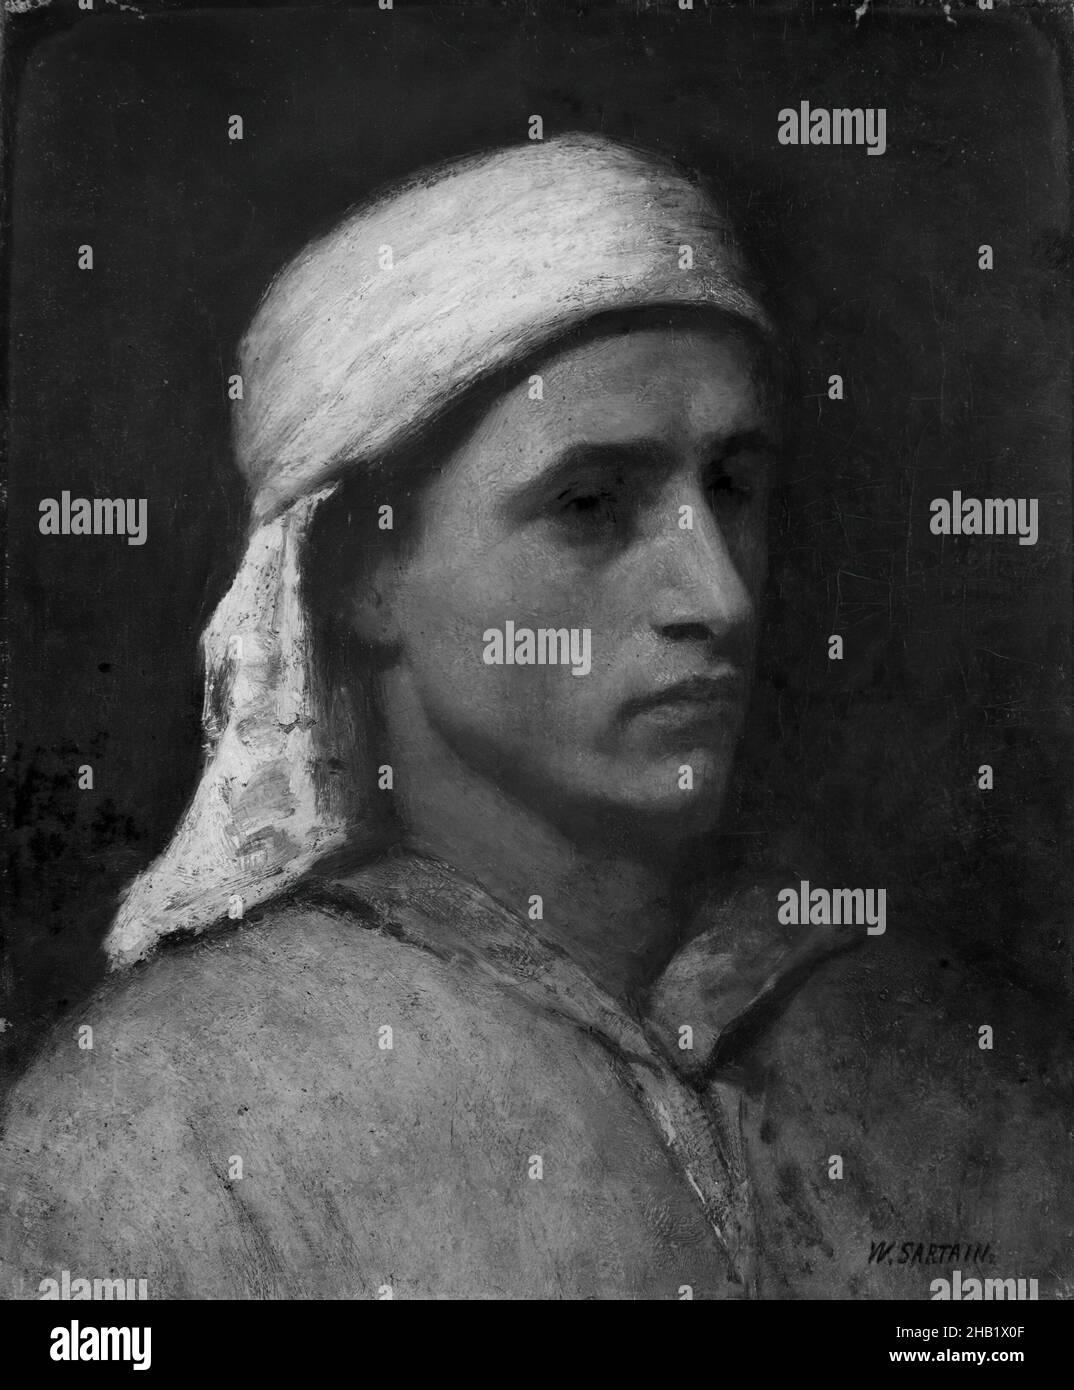 Arab Head, William Sartain, American, 1843-1924, Oil, ca. 1880, 18 1/8 x 15 1/16 in., 46 x 38.2 cm, 1880, american, american painting, Arab, Arab Head, east, gaze, hat, head, male, man, Middle East, noble, oil, oil painting, Orientalist, ottoman, painting, portrait, Sartain, William Sartain Stock Photo